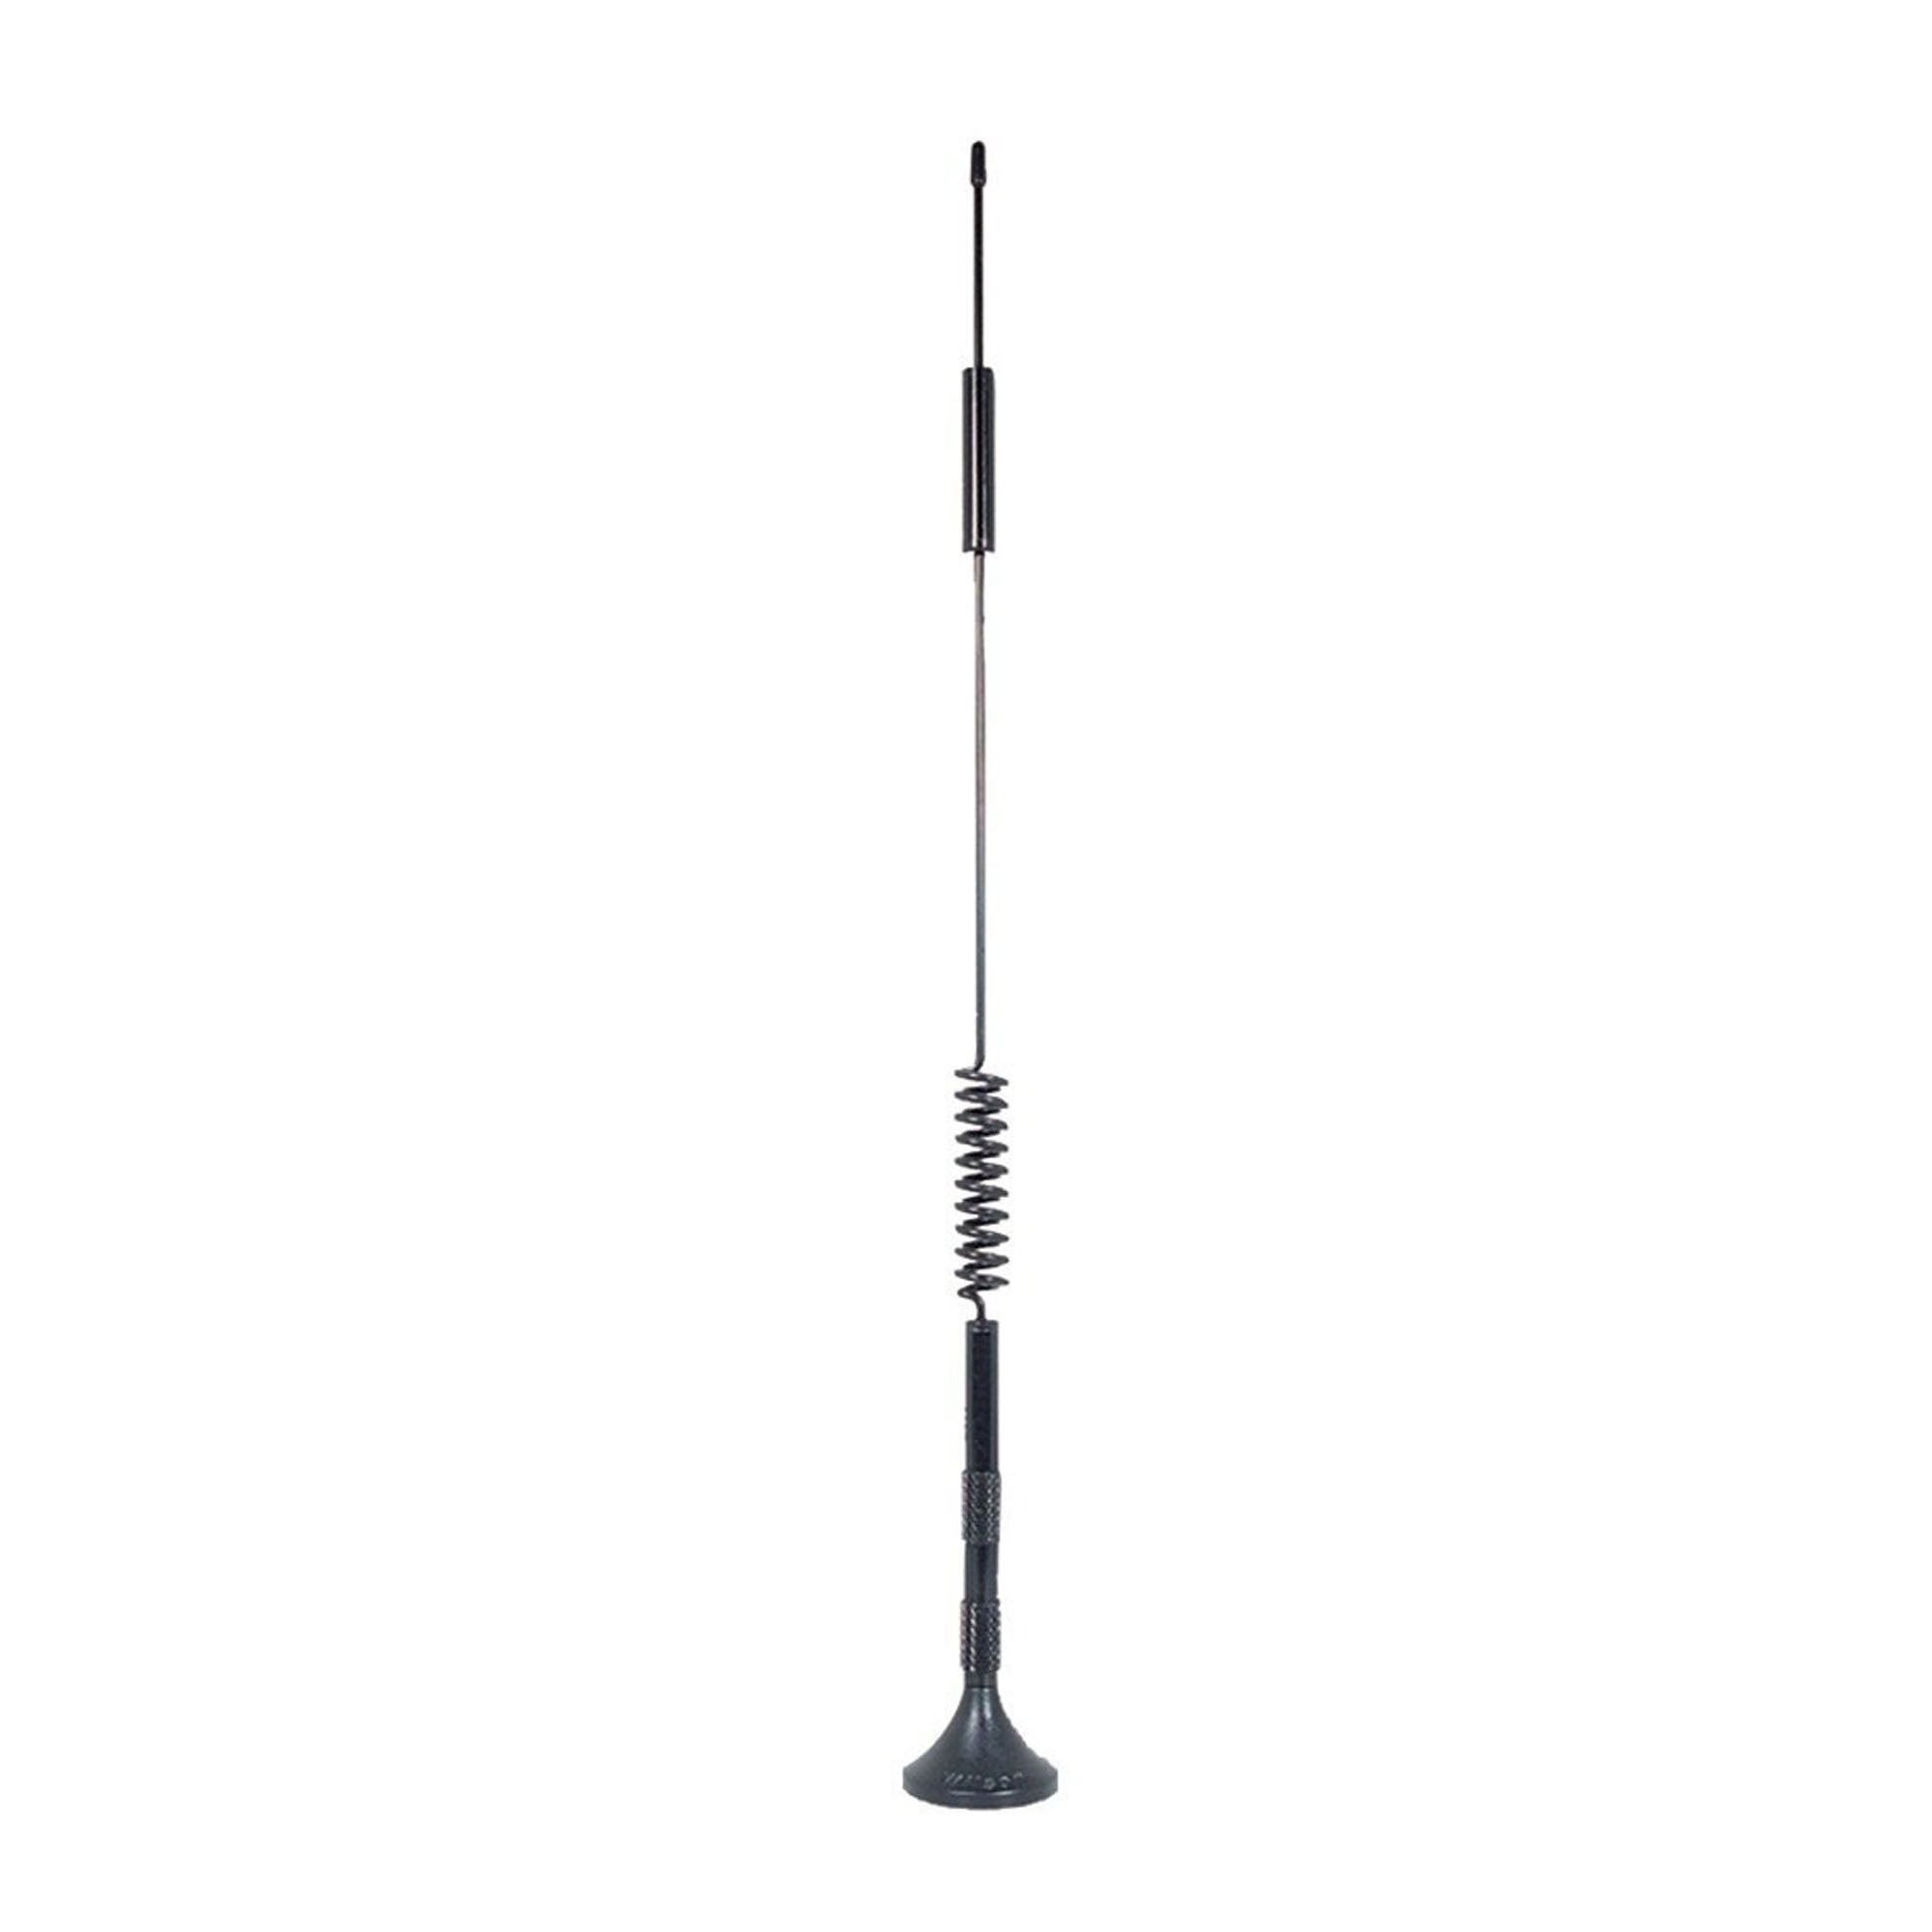 Wilson 12" Magnetic Mount Antenna 10 foot cable - FME (301103) - 3G/4G - 700/850/1700/1900/2100 MHz